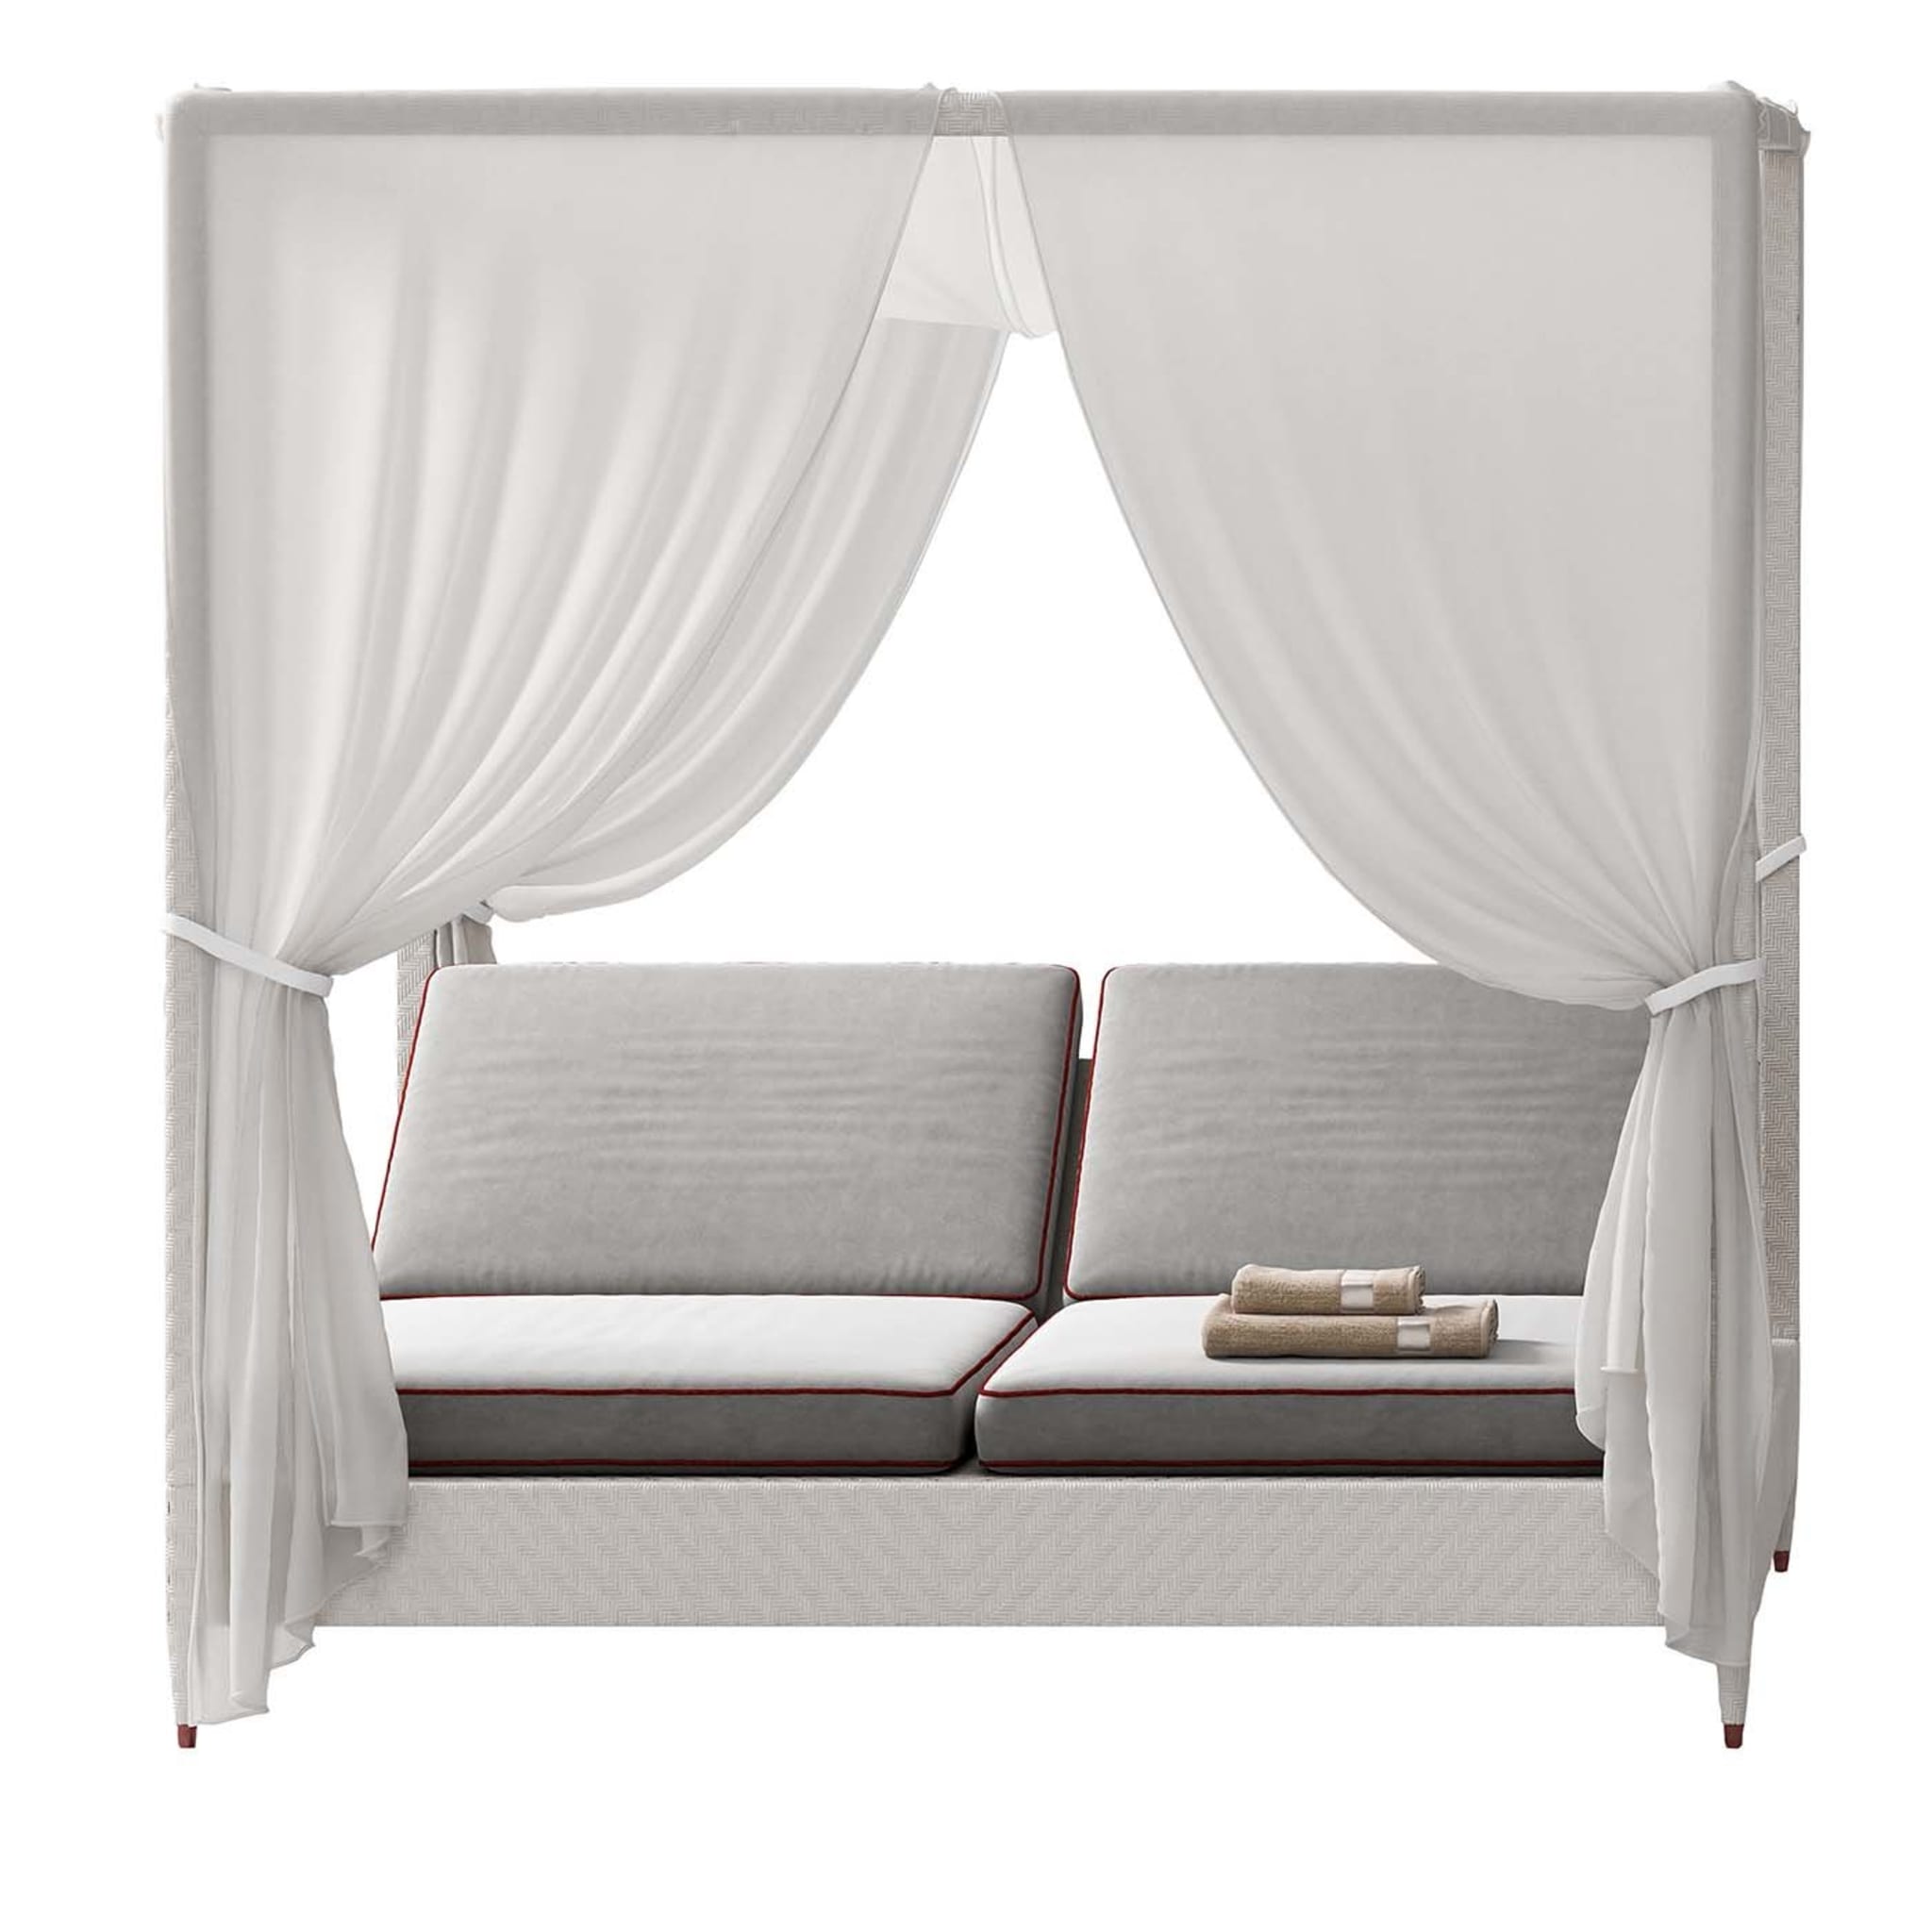 White 2-Seater Daybed with Canopy - Main view